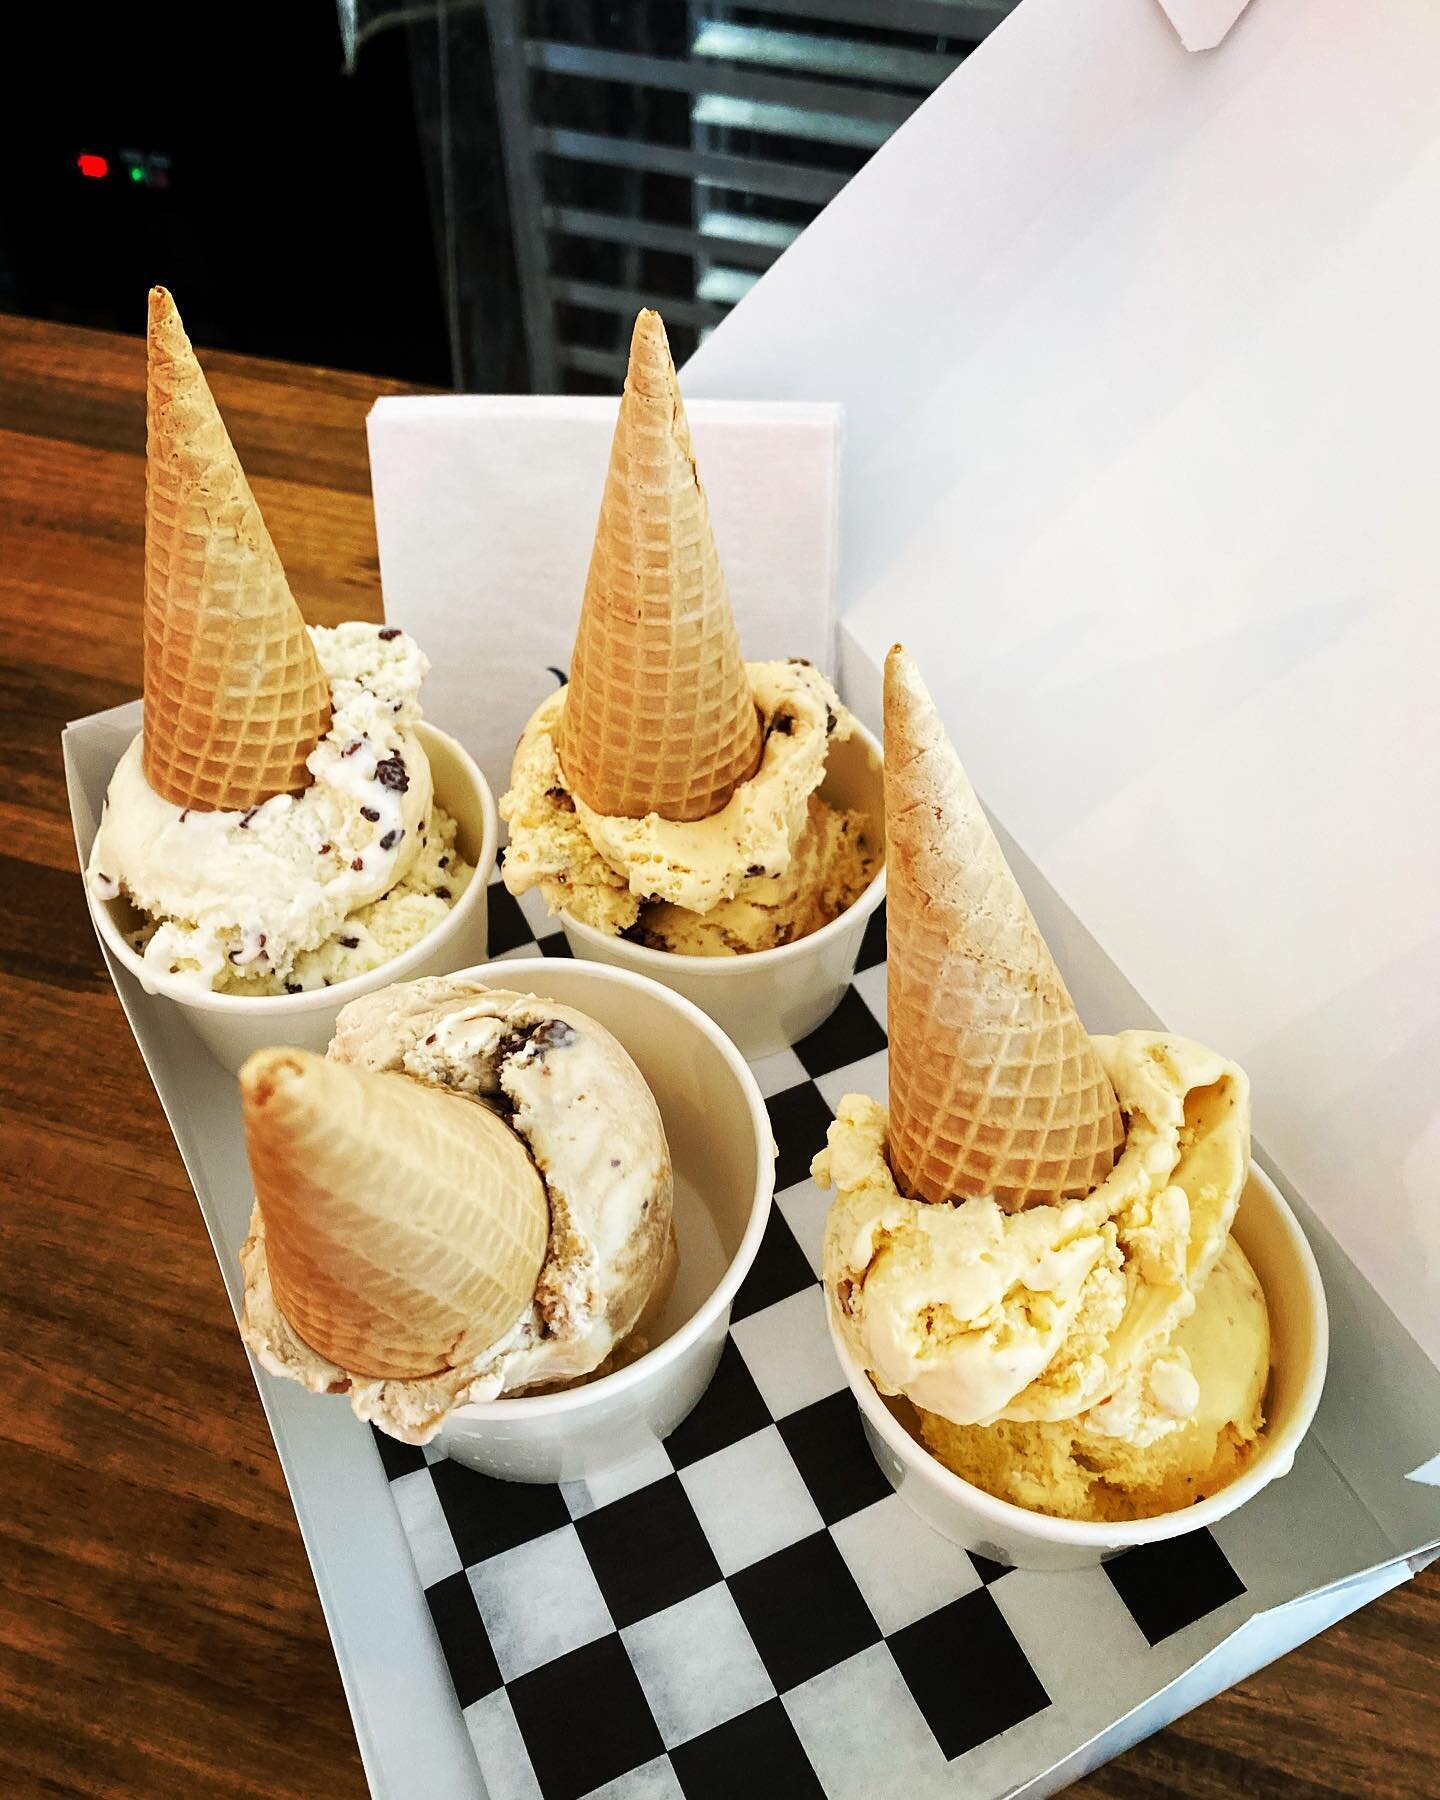 When the shop is too busy to go out for ice cream. We celebrate a new contract with waffle cones 🍦 to-go!!!